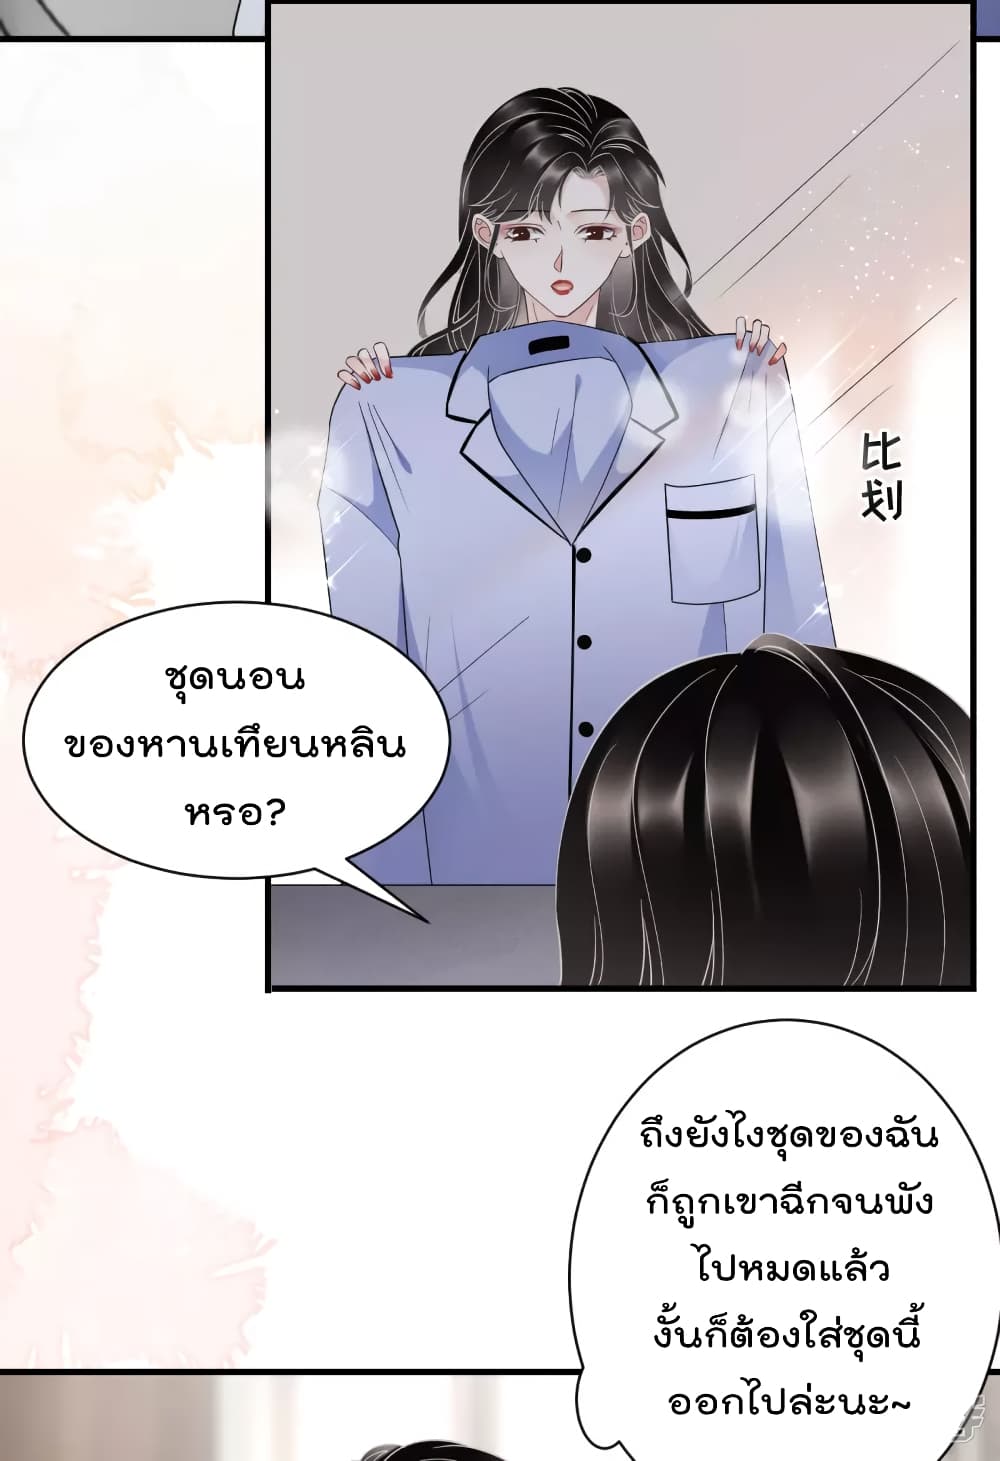 What Can the Eldest Lady Have คุณหนูใหญ่ ทำไมคุณร้ายอย่างนี้ 32-32